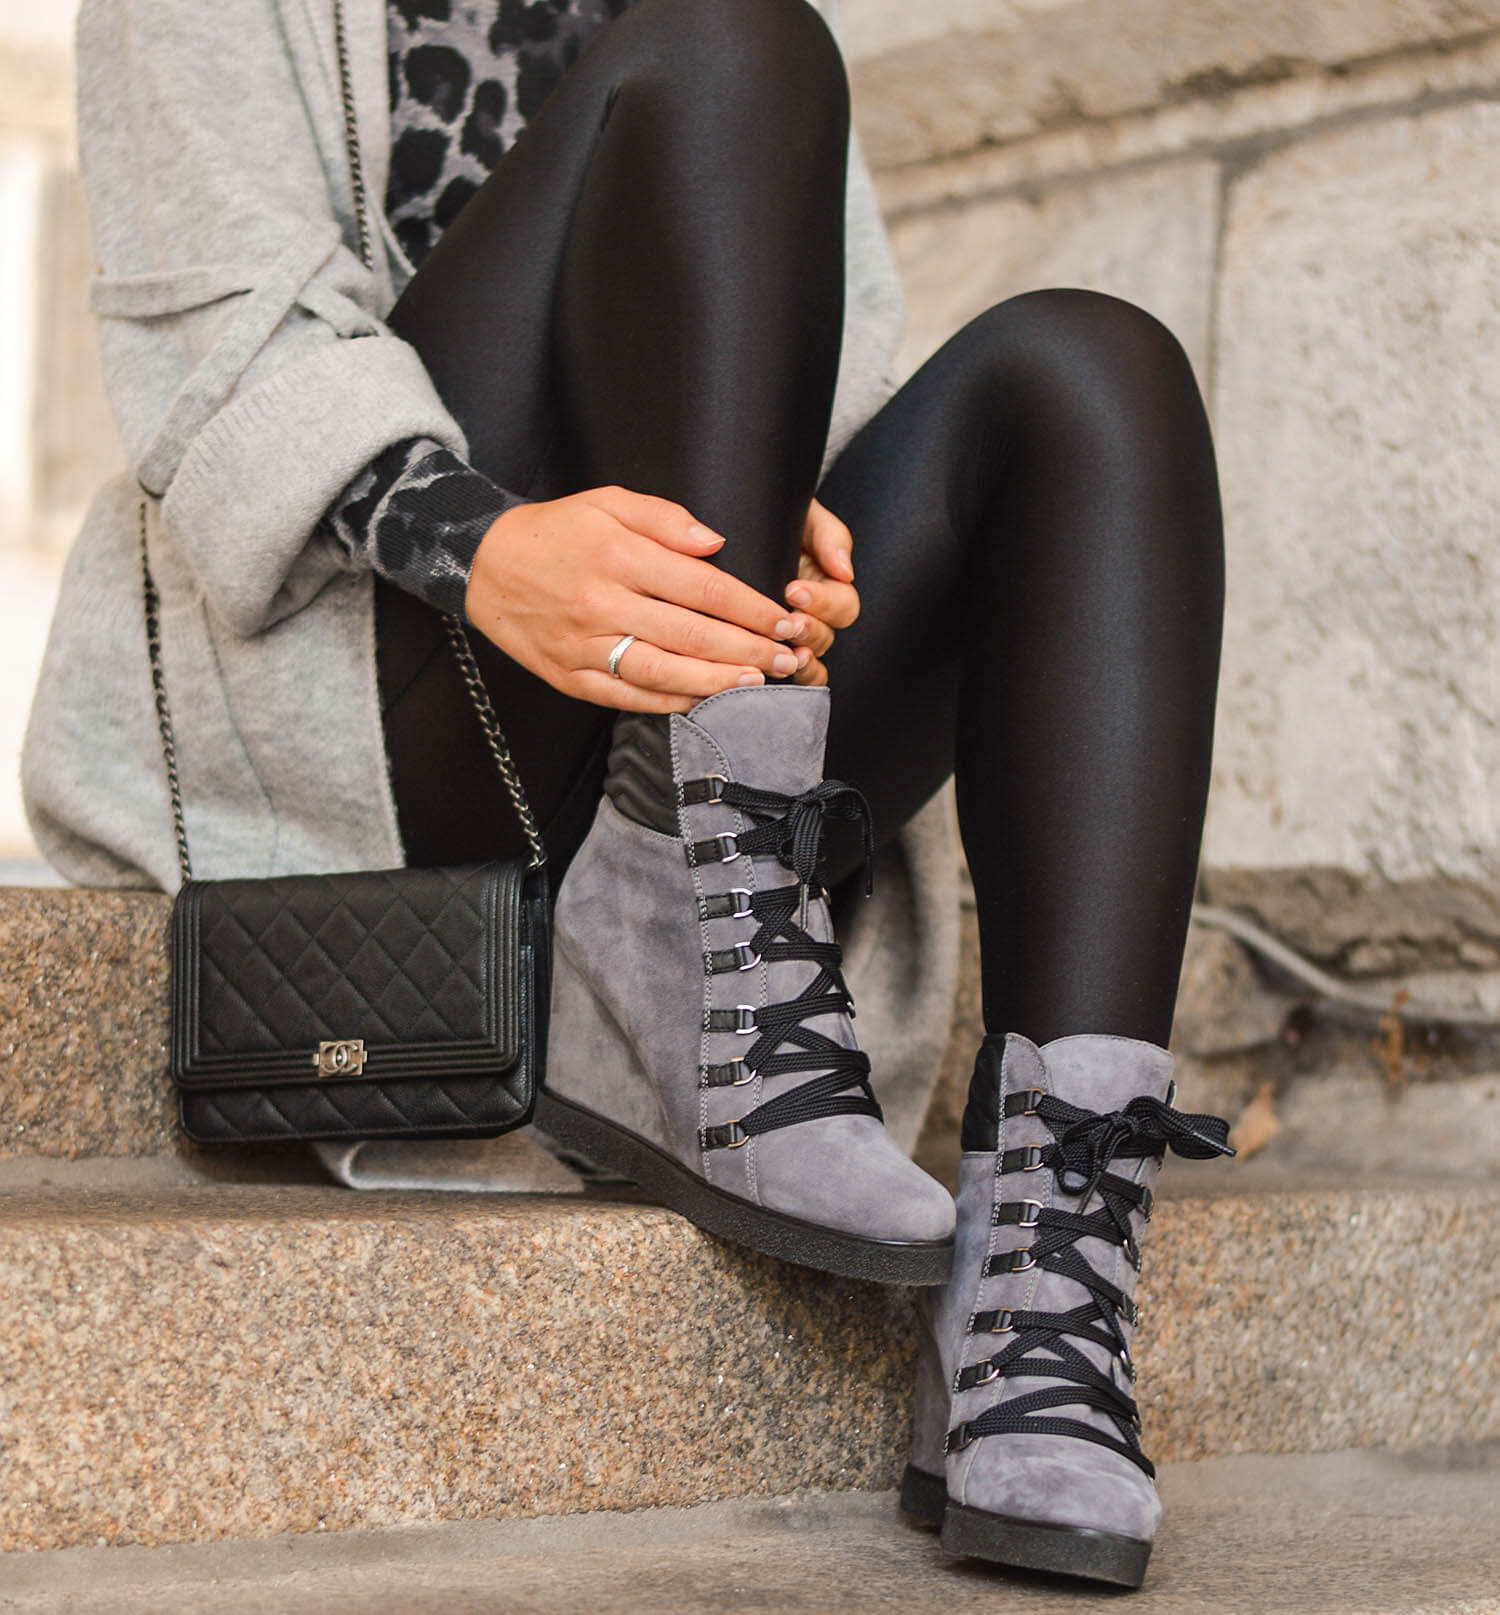 Knit-Love-Leo-Print-Shiny-Tights-Hiker-Boots-Kationette-Fashionblogger-Germany-Outfit-Post